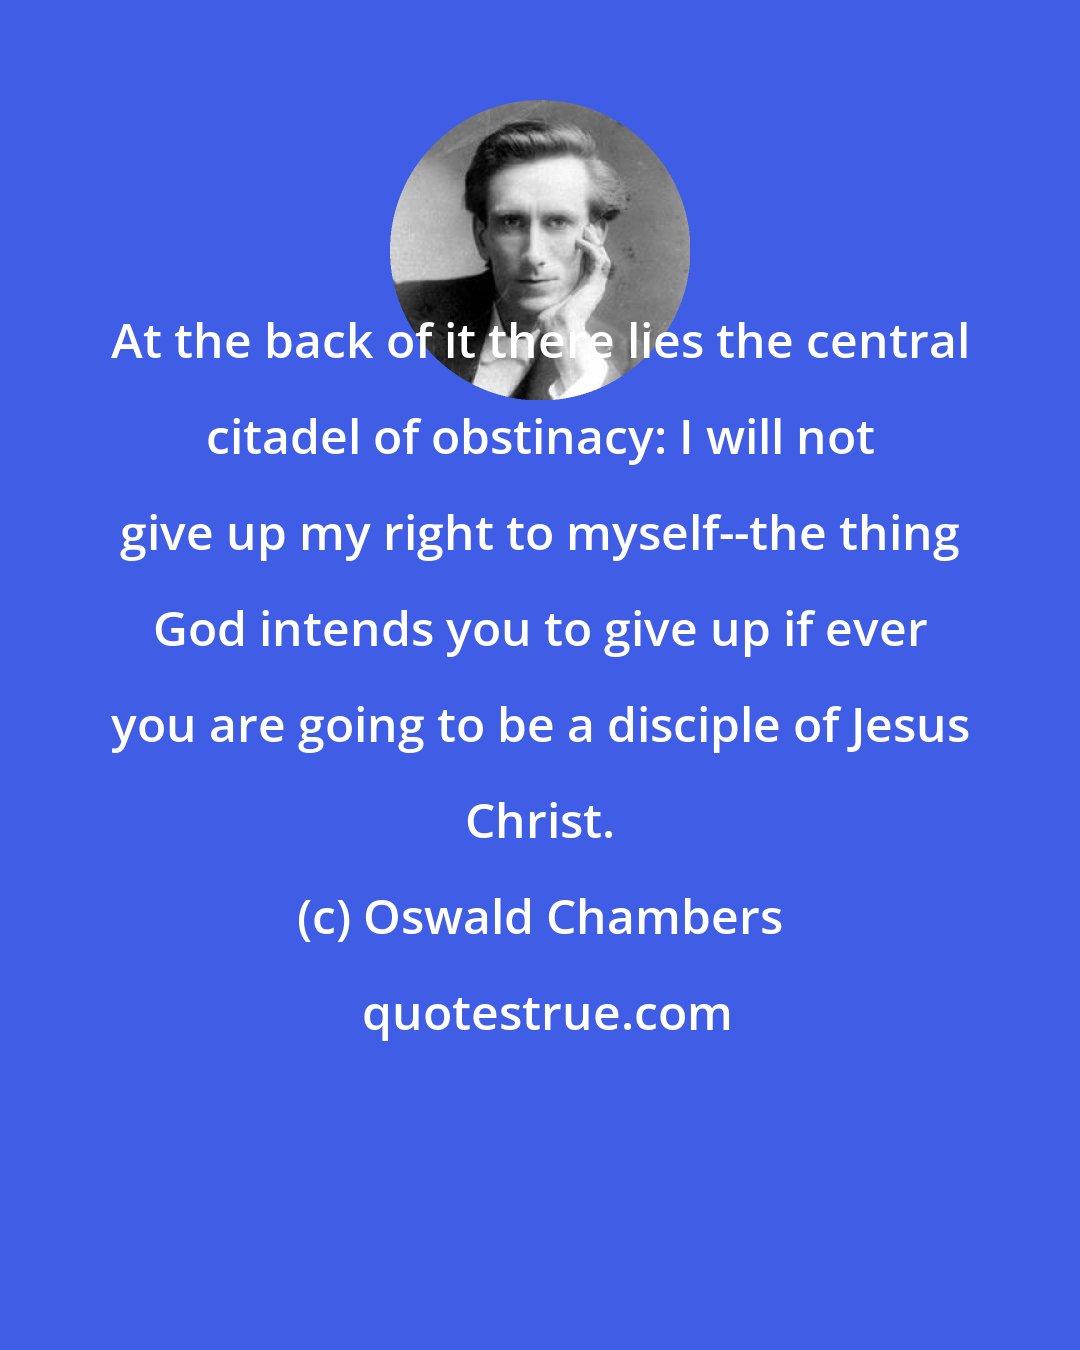 Oswald Chambers: At the back of it there lies the central citadel of obstinacy: I will not give up my right to myself--the thing God intends you to give up if ever you are going to be a disciple of Jesus Christ.